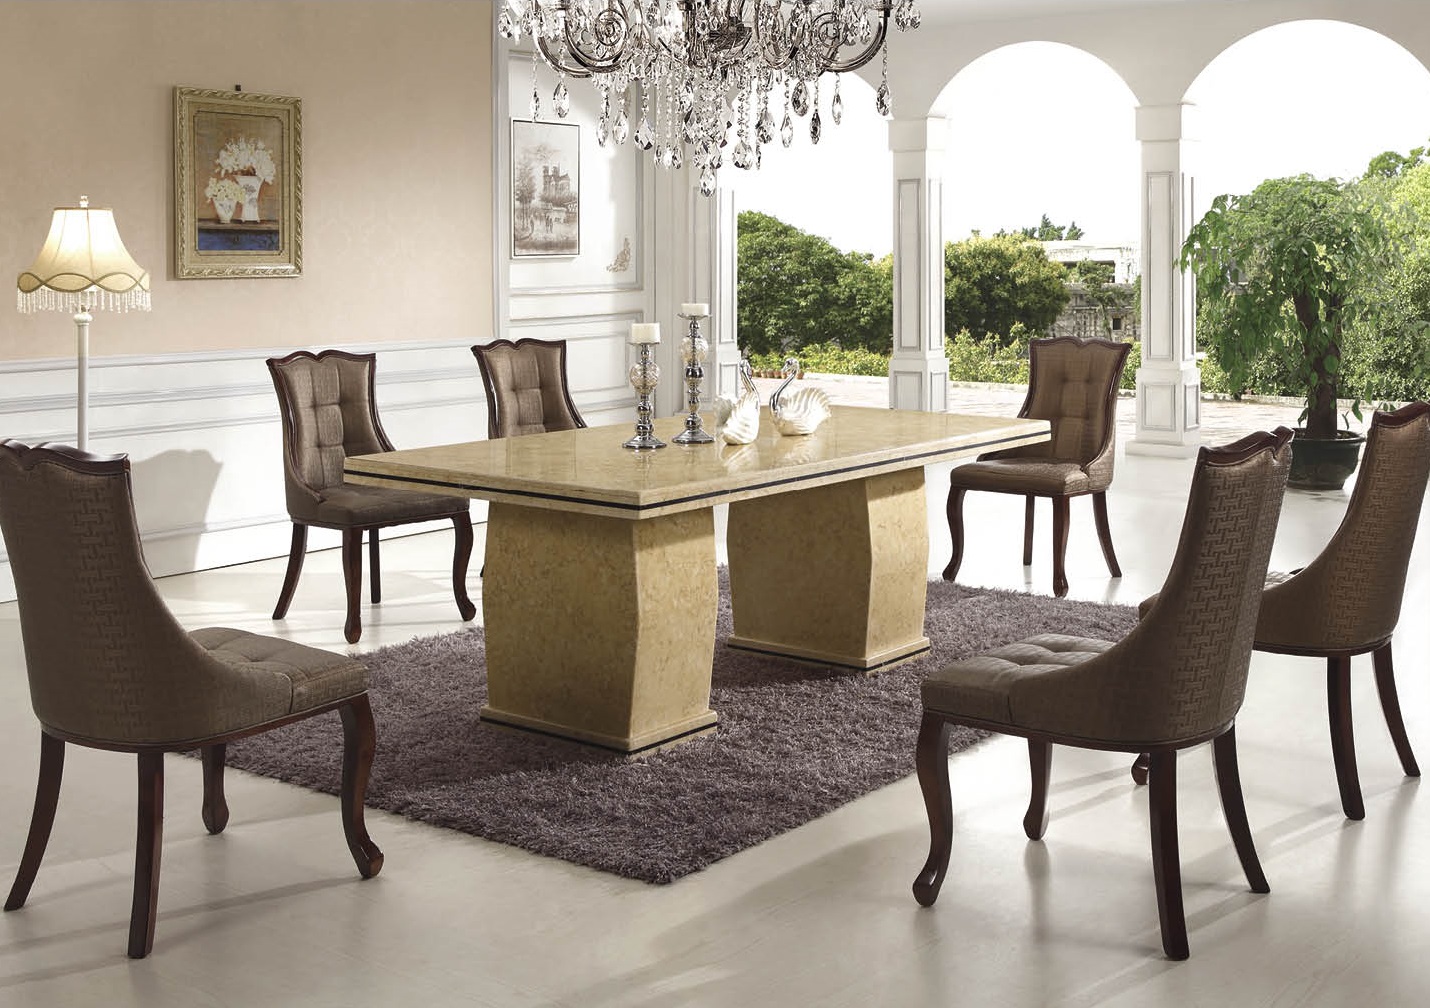 Catania Marble Dining Table with 8 Chairs | Brown Marble Dining Table